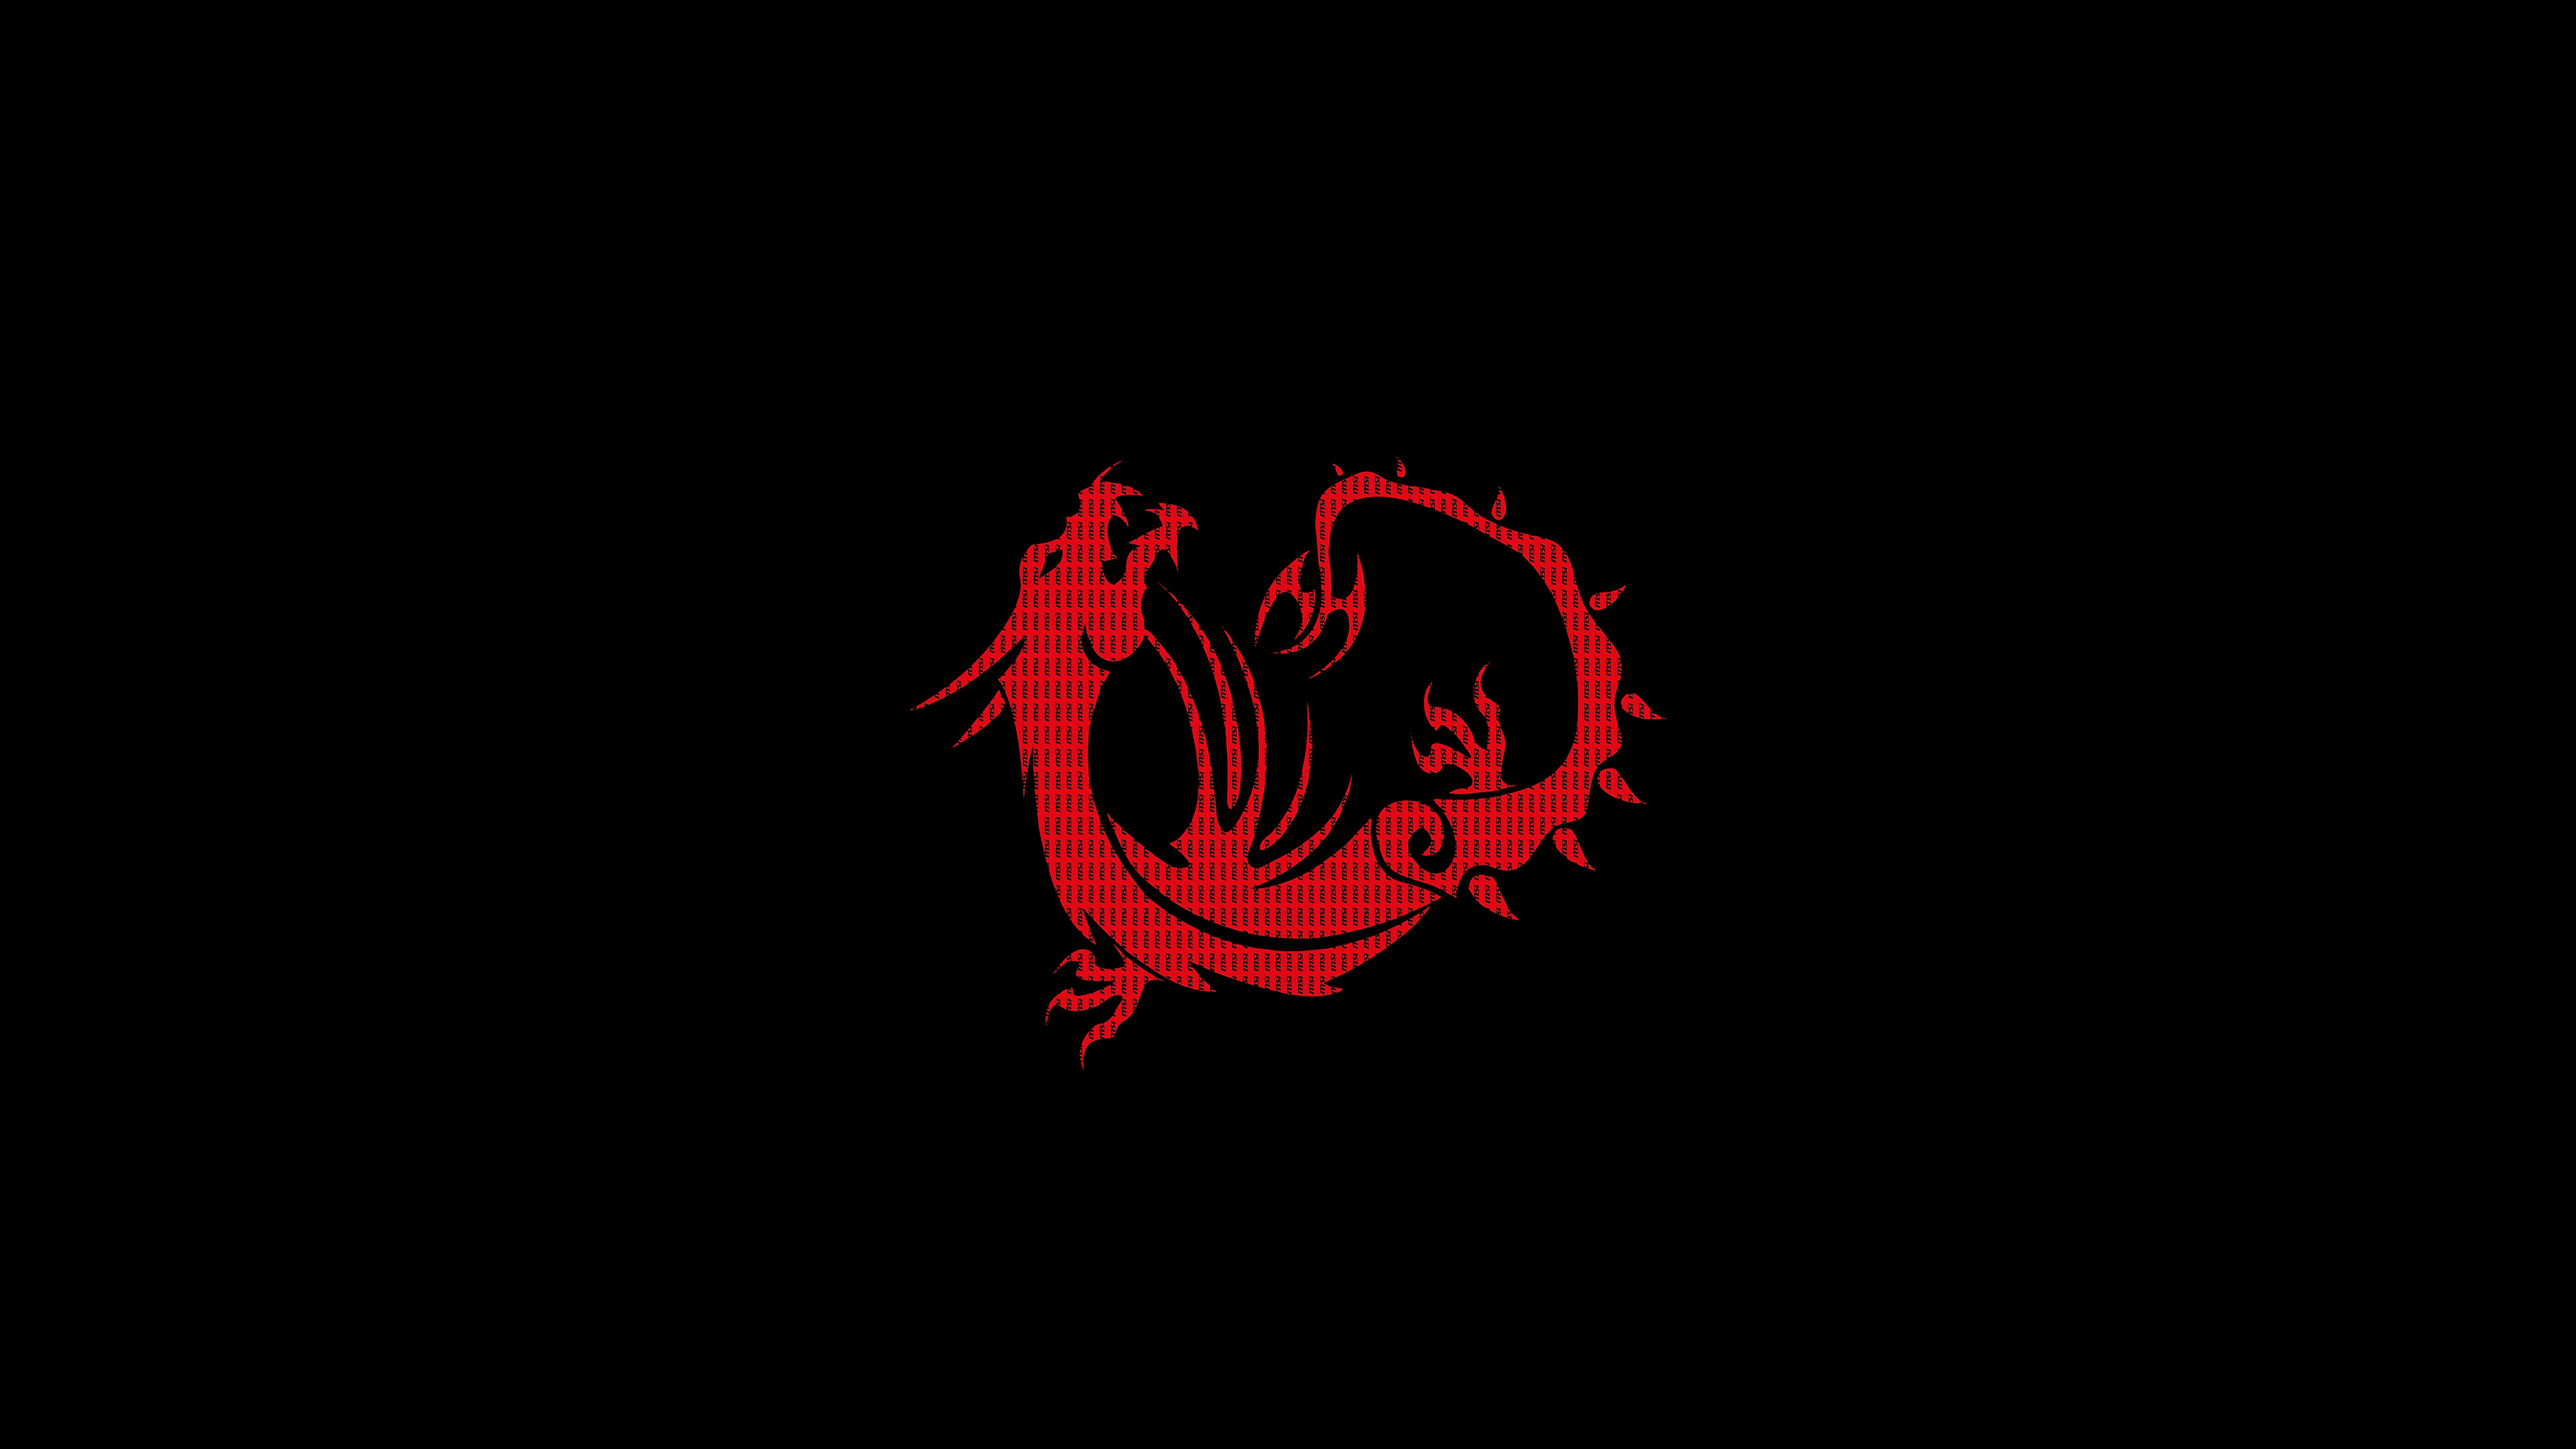 3840x2160 2560x1600 Red Dragon Black Minimal 4k 2560x1600 Resolution HD 4k Wallpapers, Images, Backgrounds, Photos and Pictures